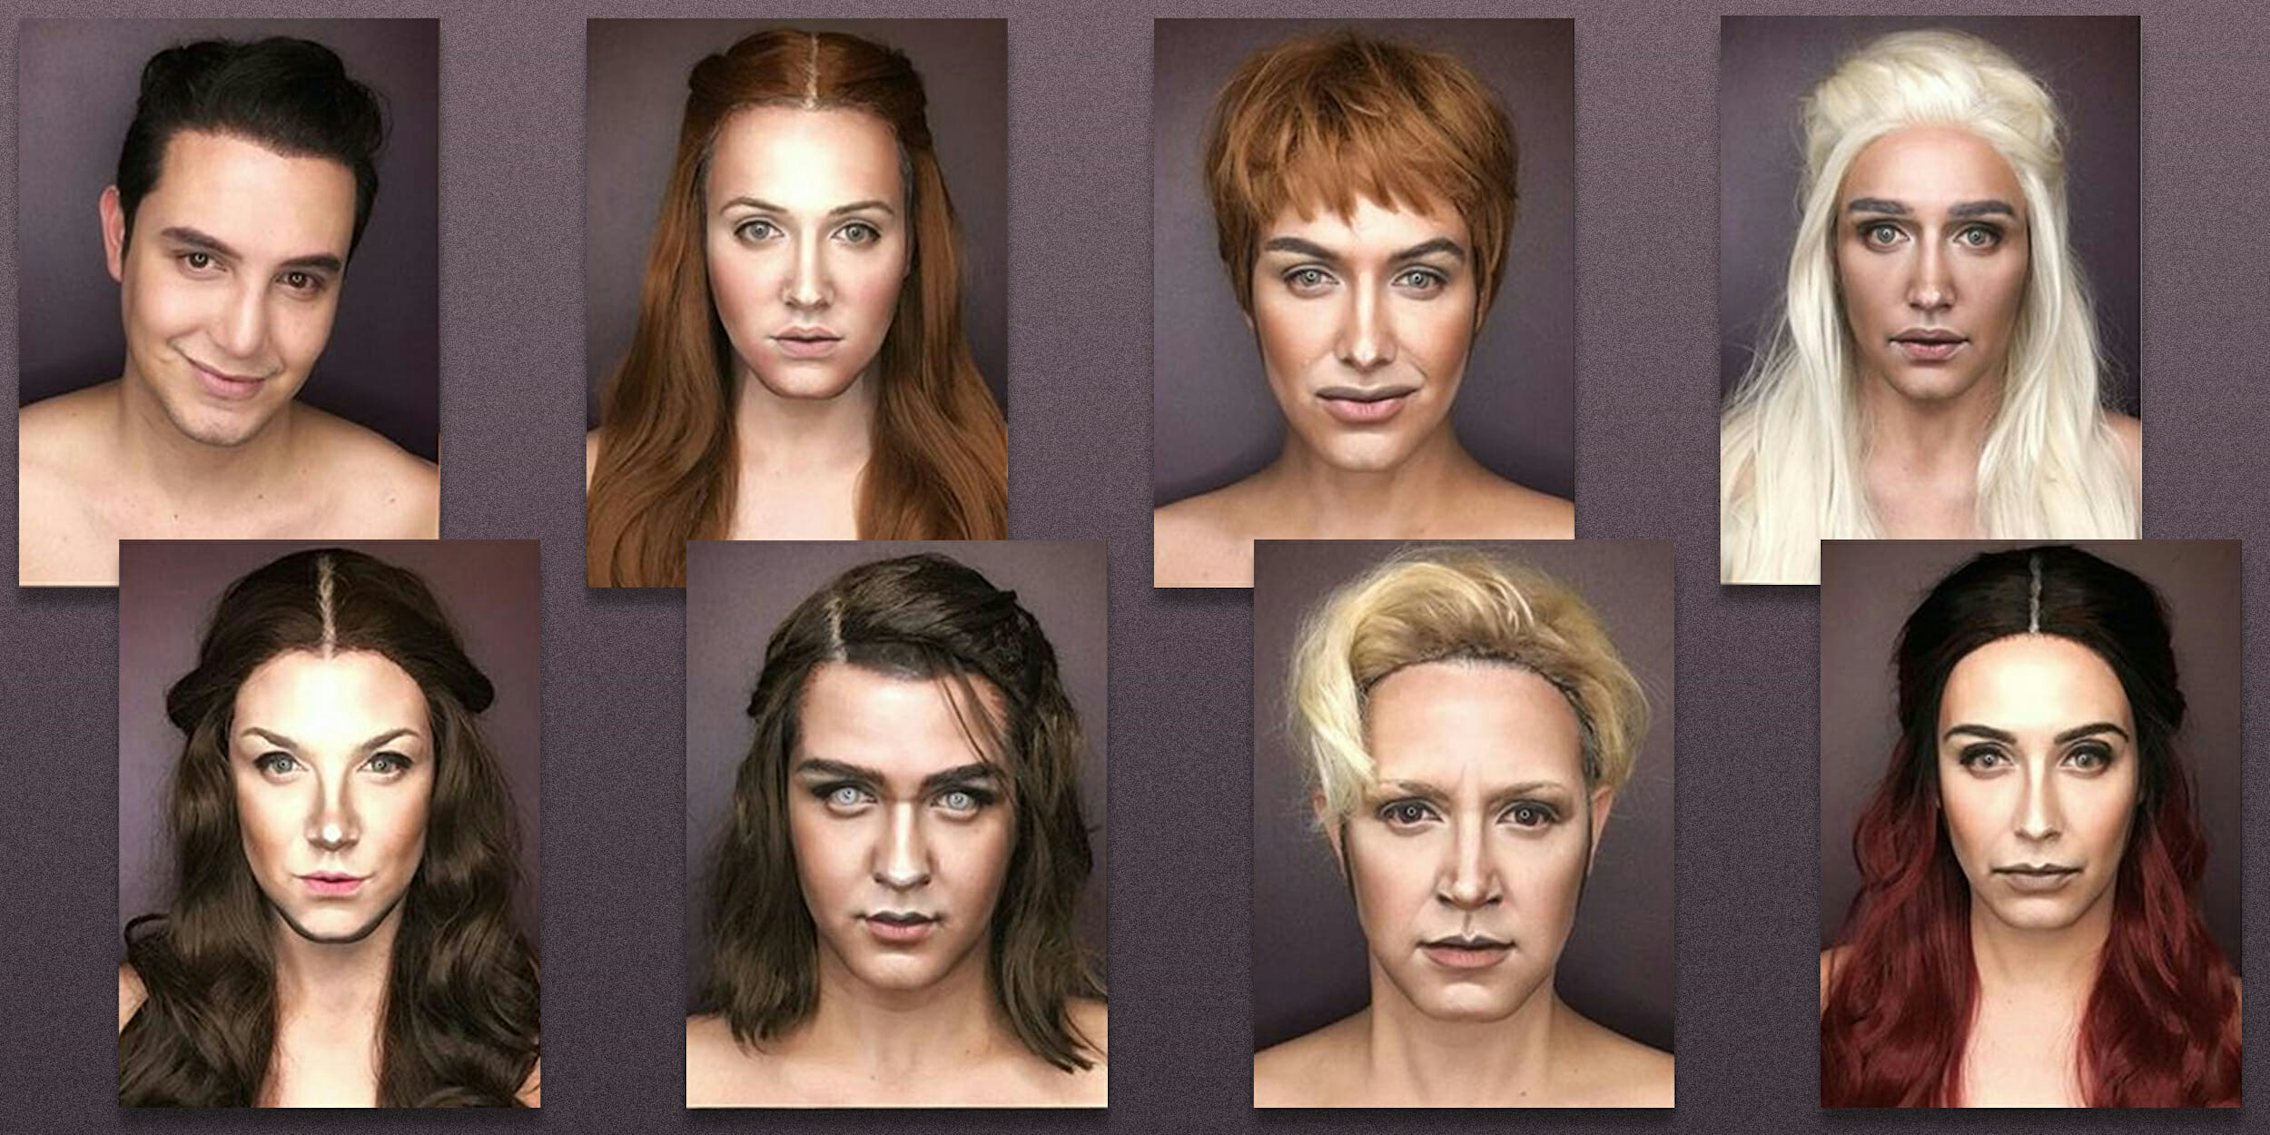 Man transforms into female Game of Thrones characters with makeup and wigs